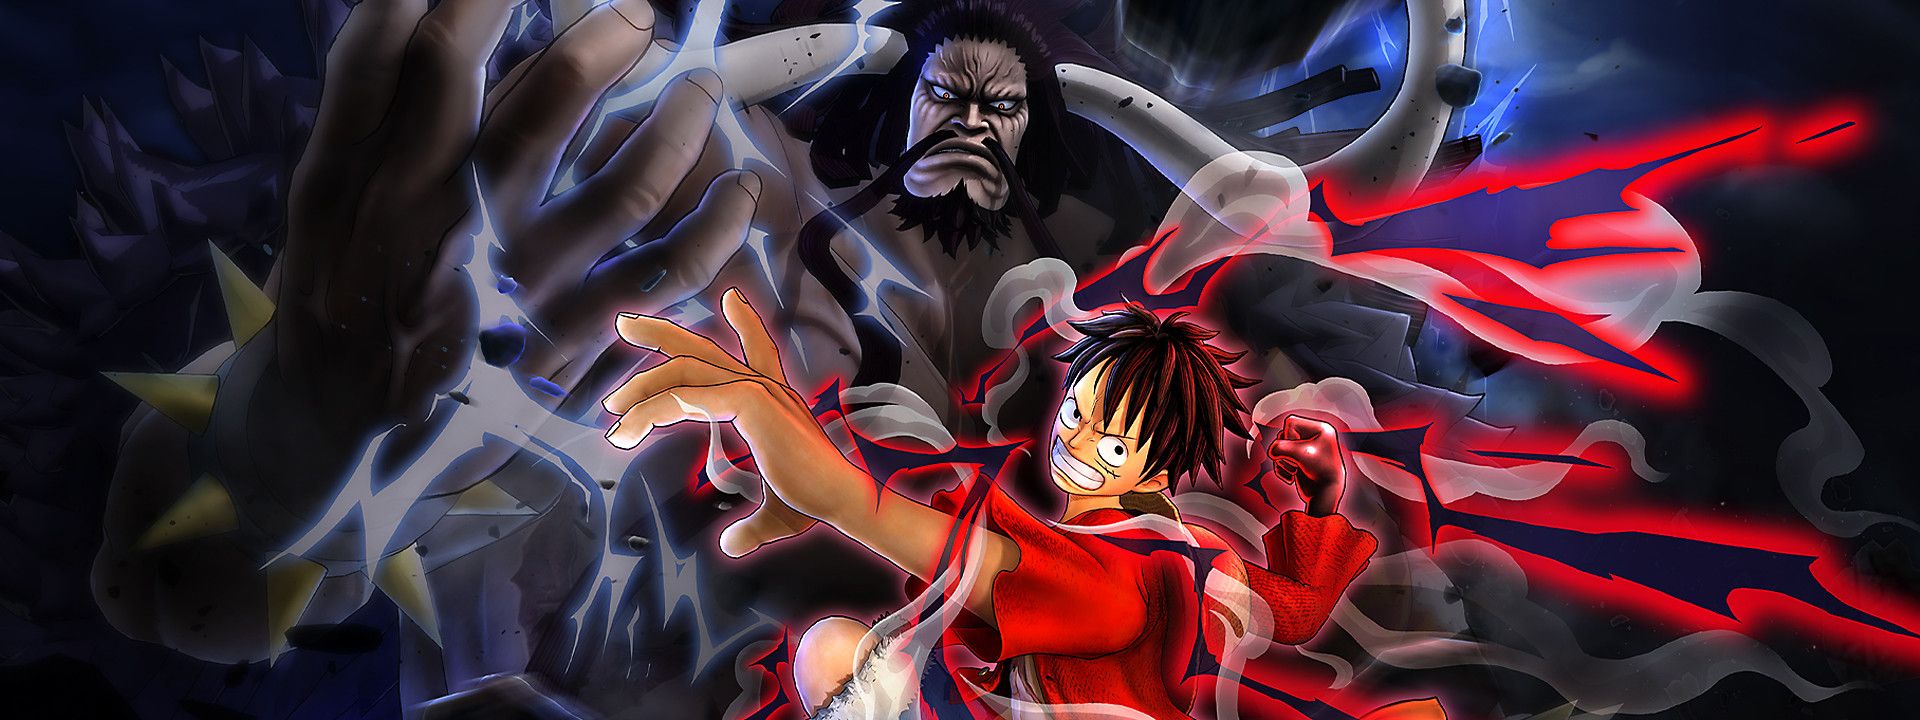 ONE PIECE: PIRATE WARRIORS 4 Game